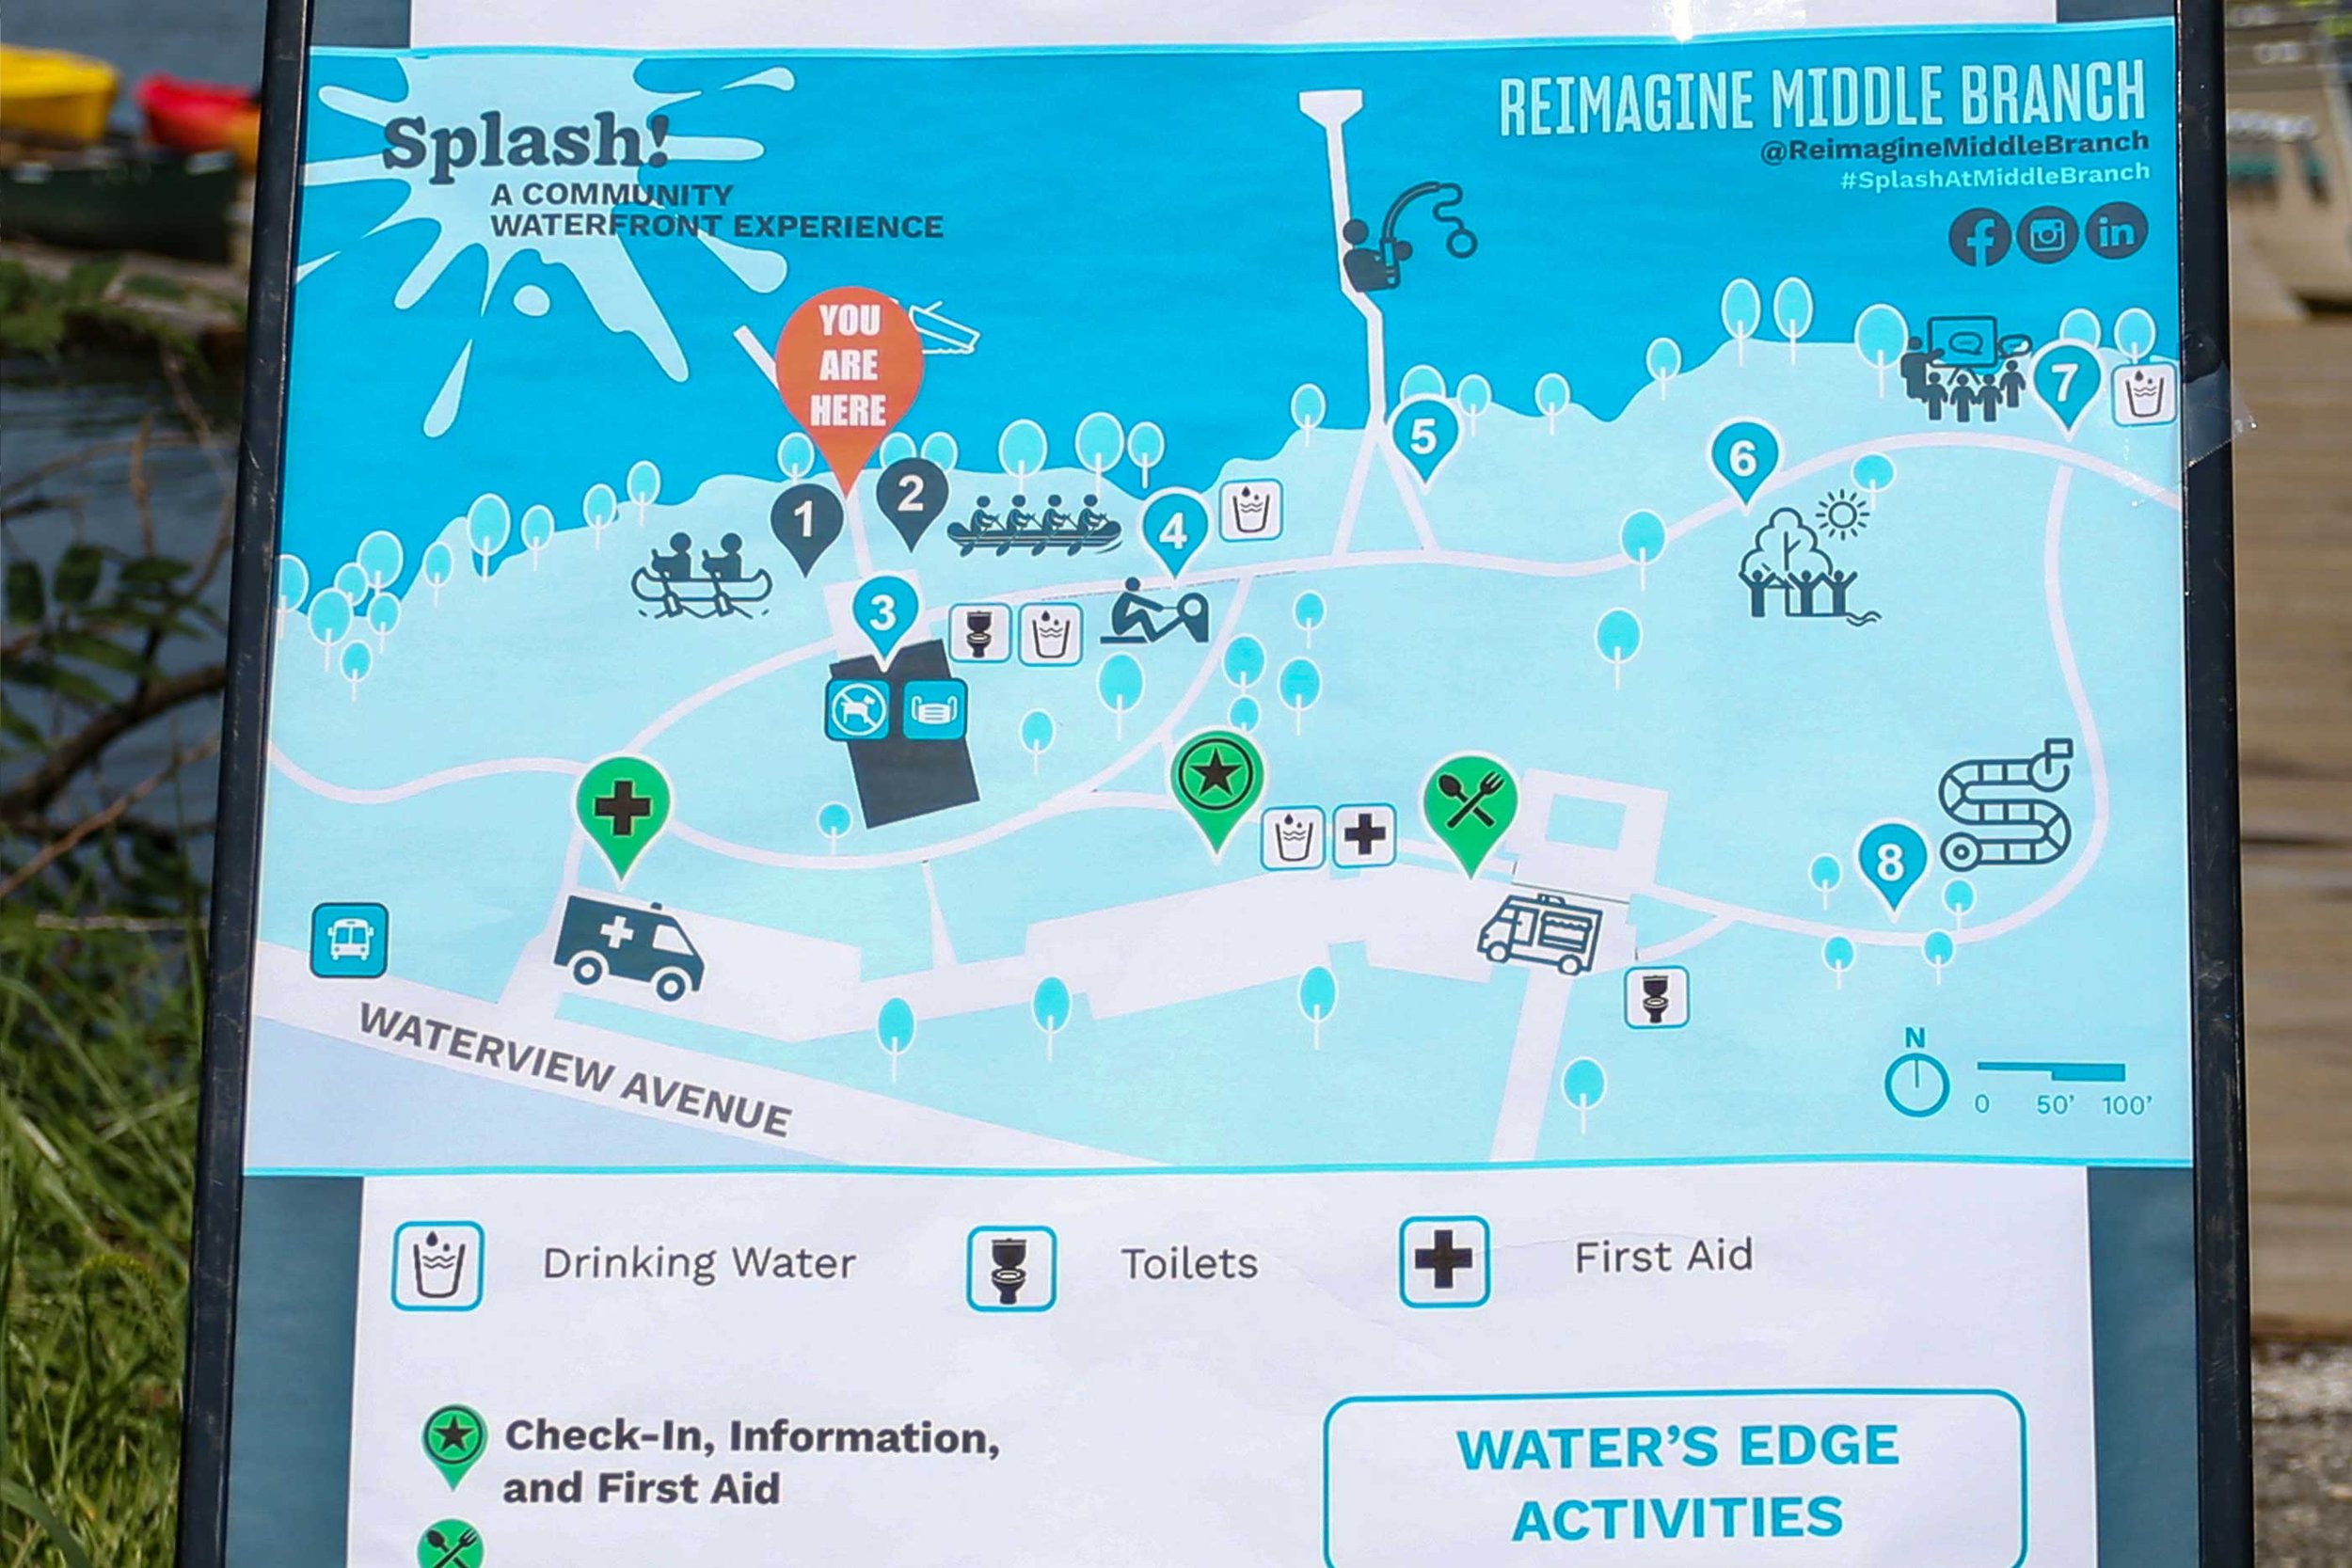  Map of event showing different activities 